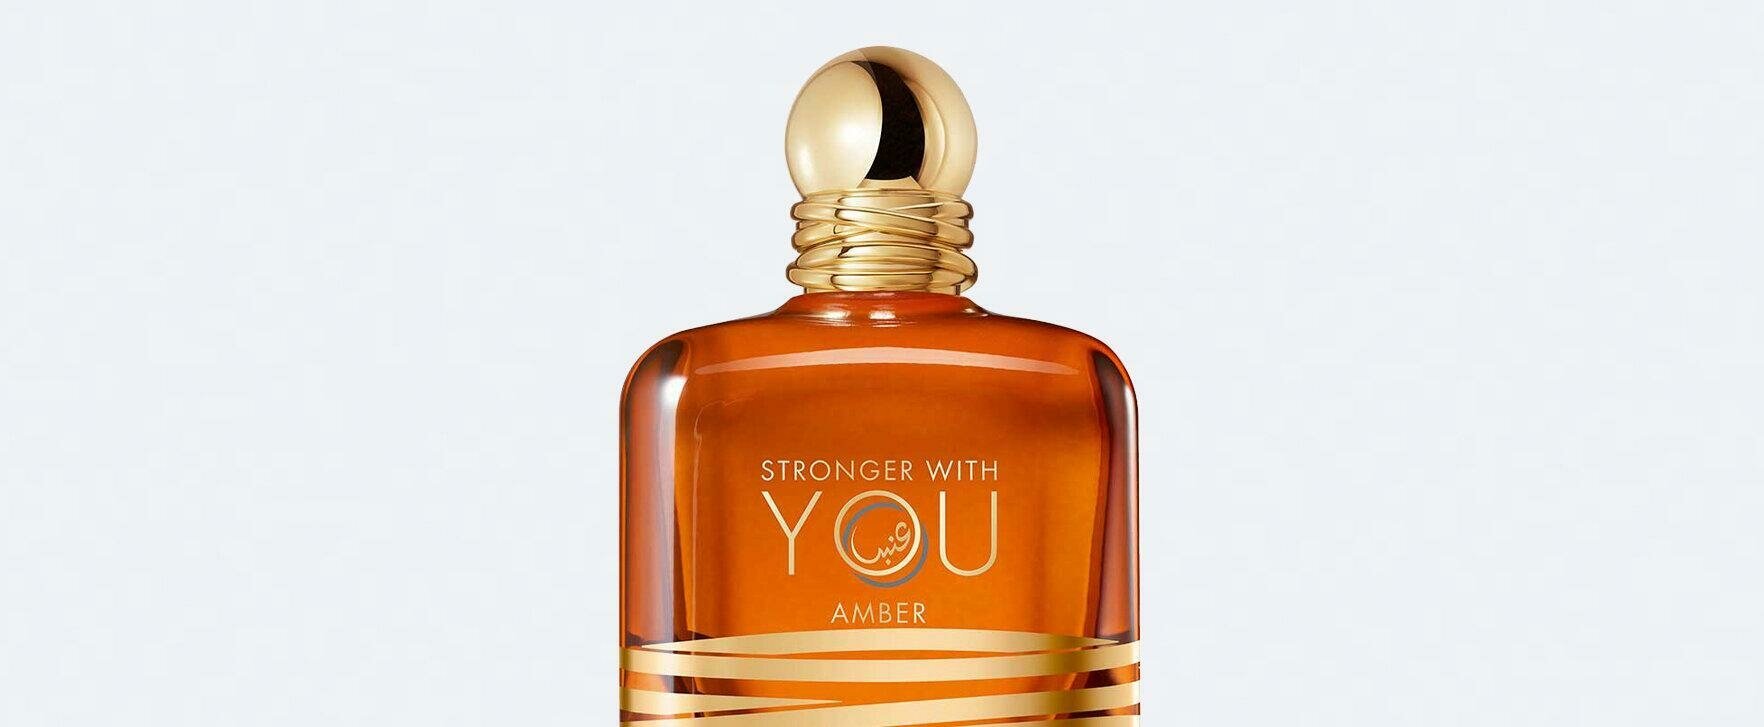 A Symbol to Love: The New Fougère Amber Fragrance by Giorgio Armani